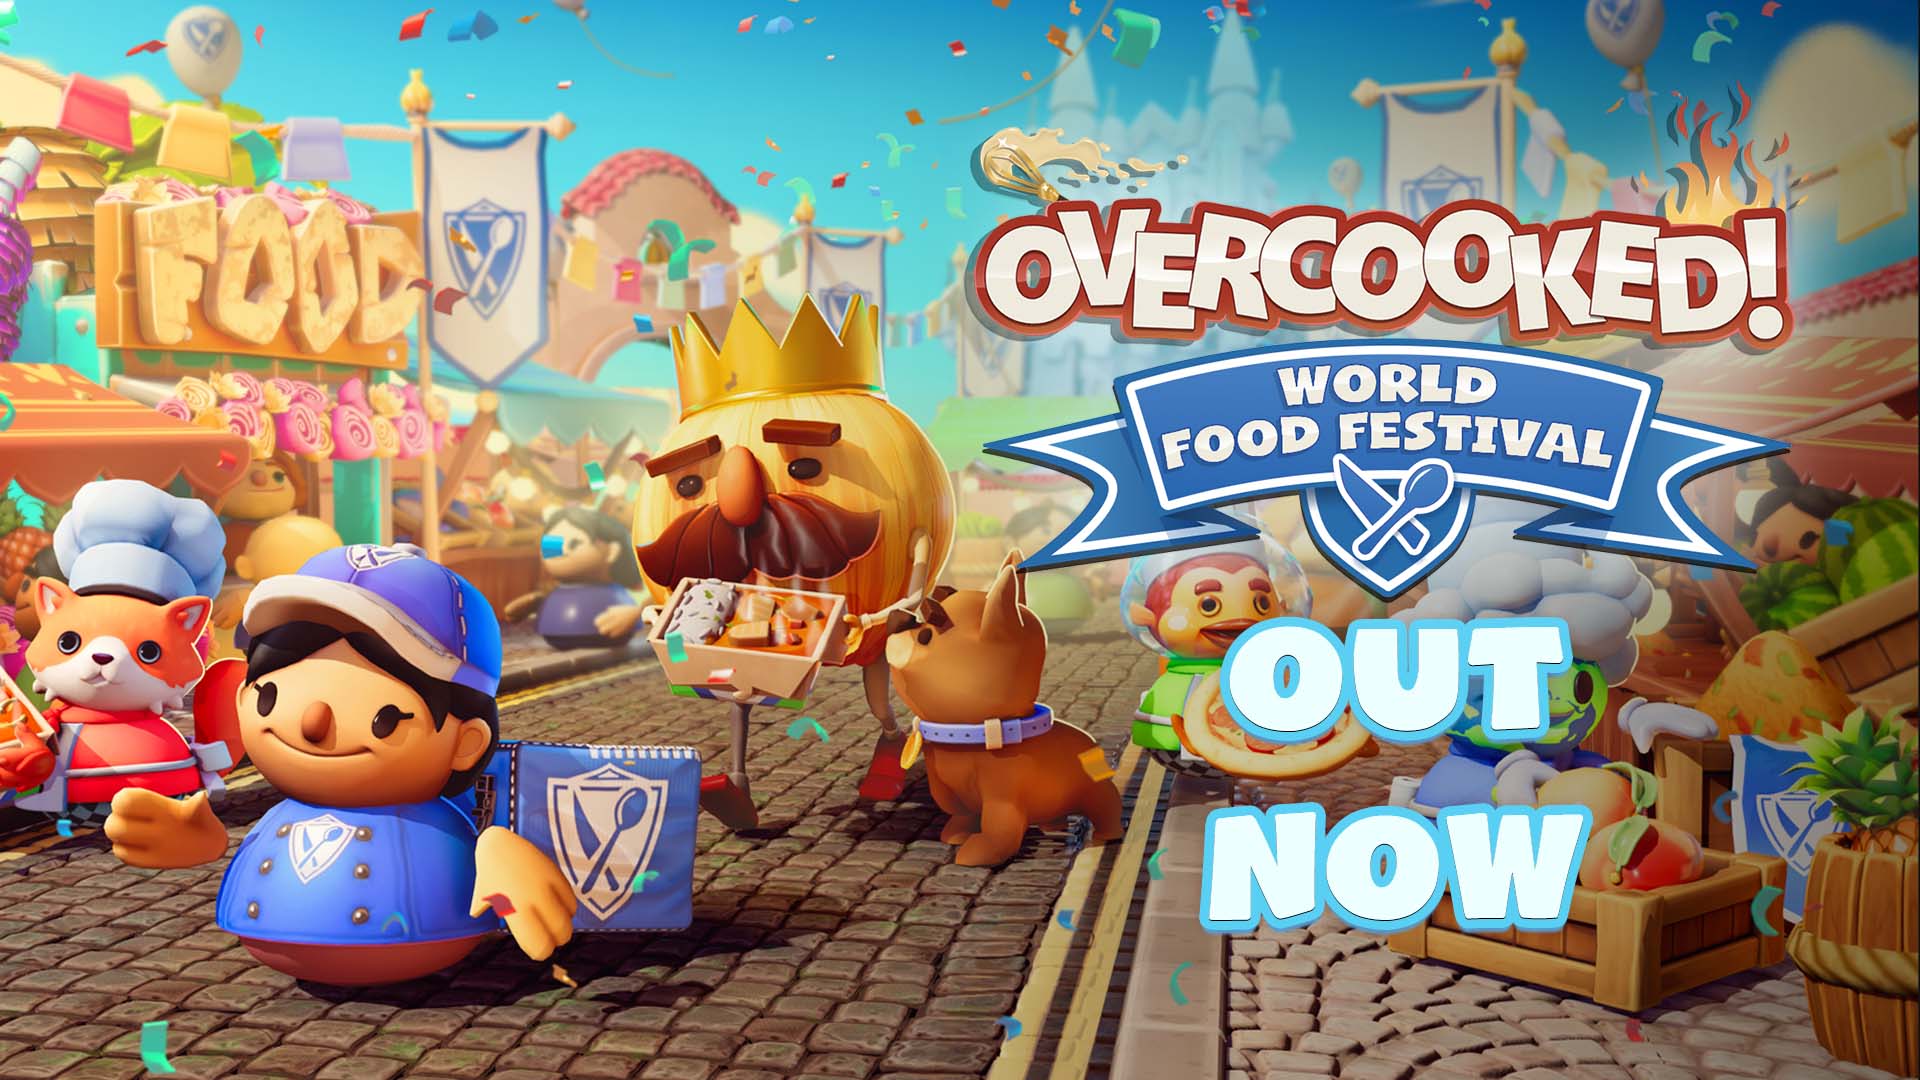 Overcooked! All You Can Eat FAQ - Team17 Digital LTD - The Spirit Of  Independent Games